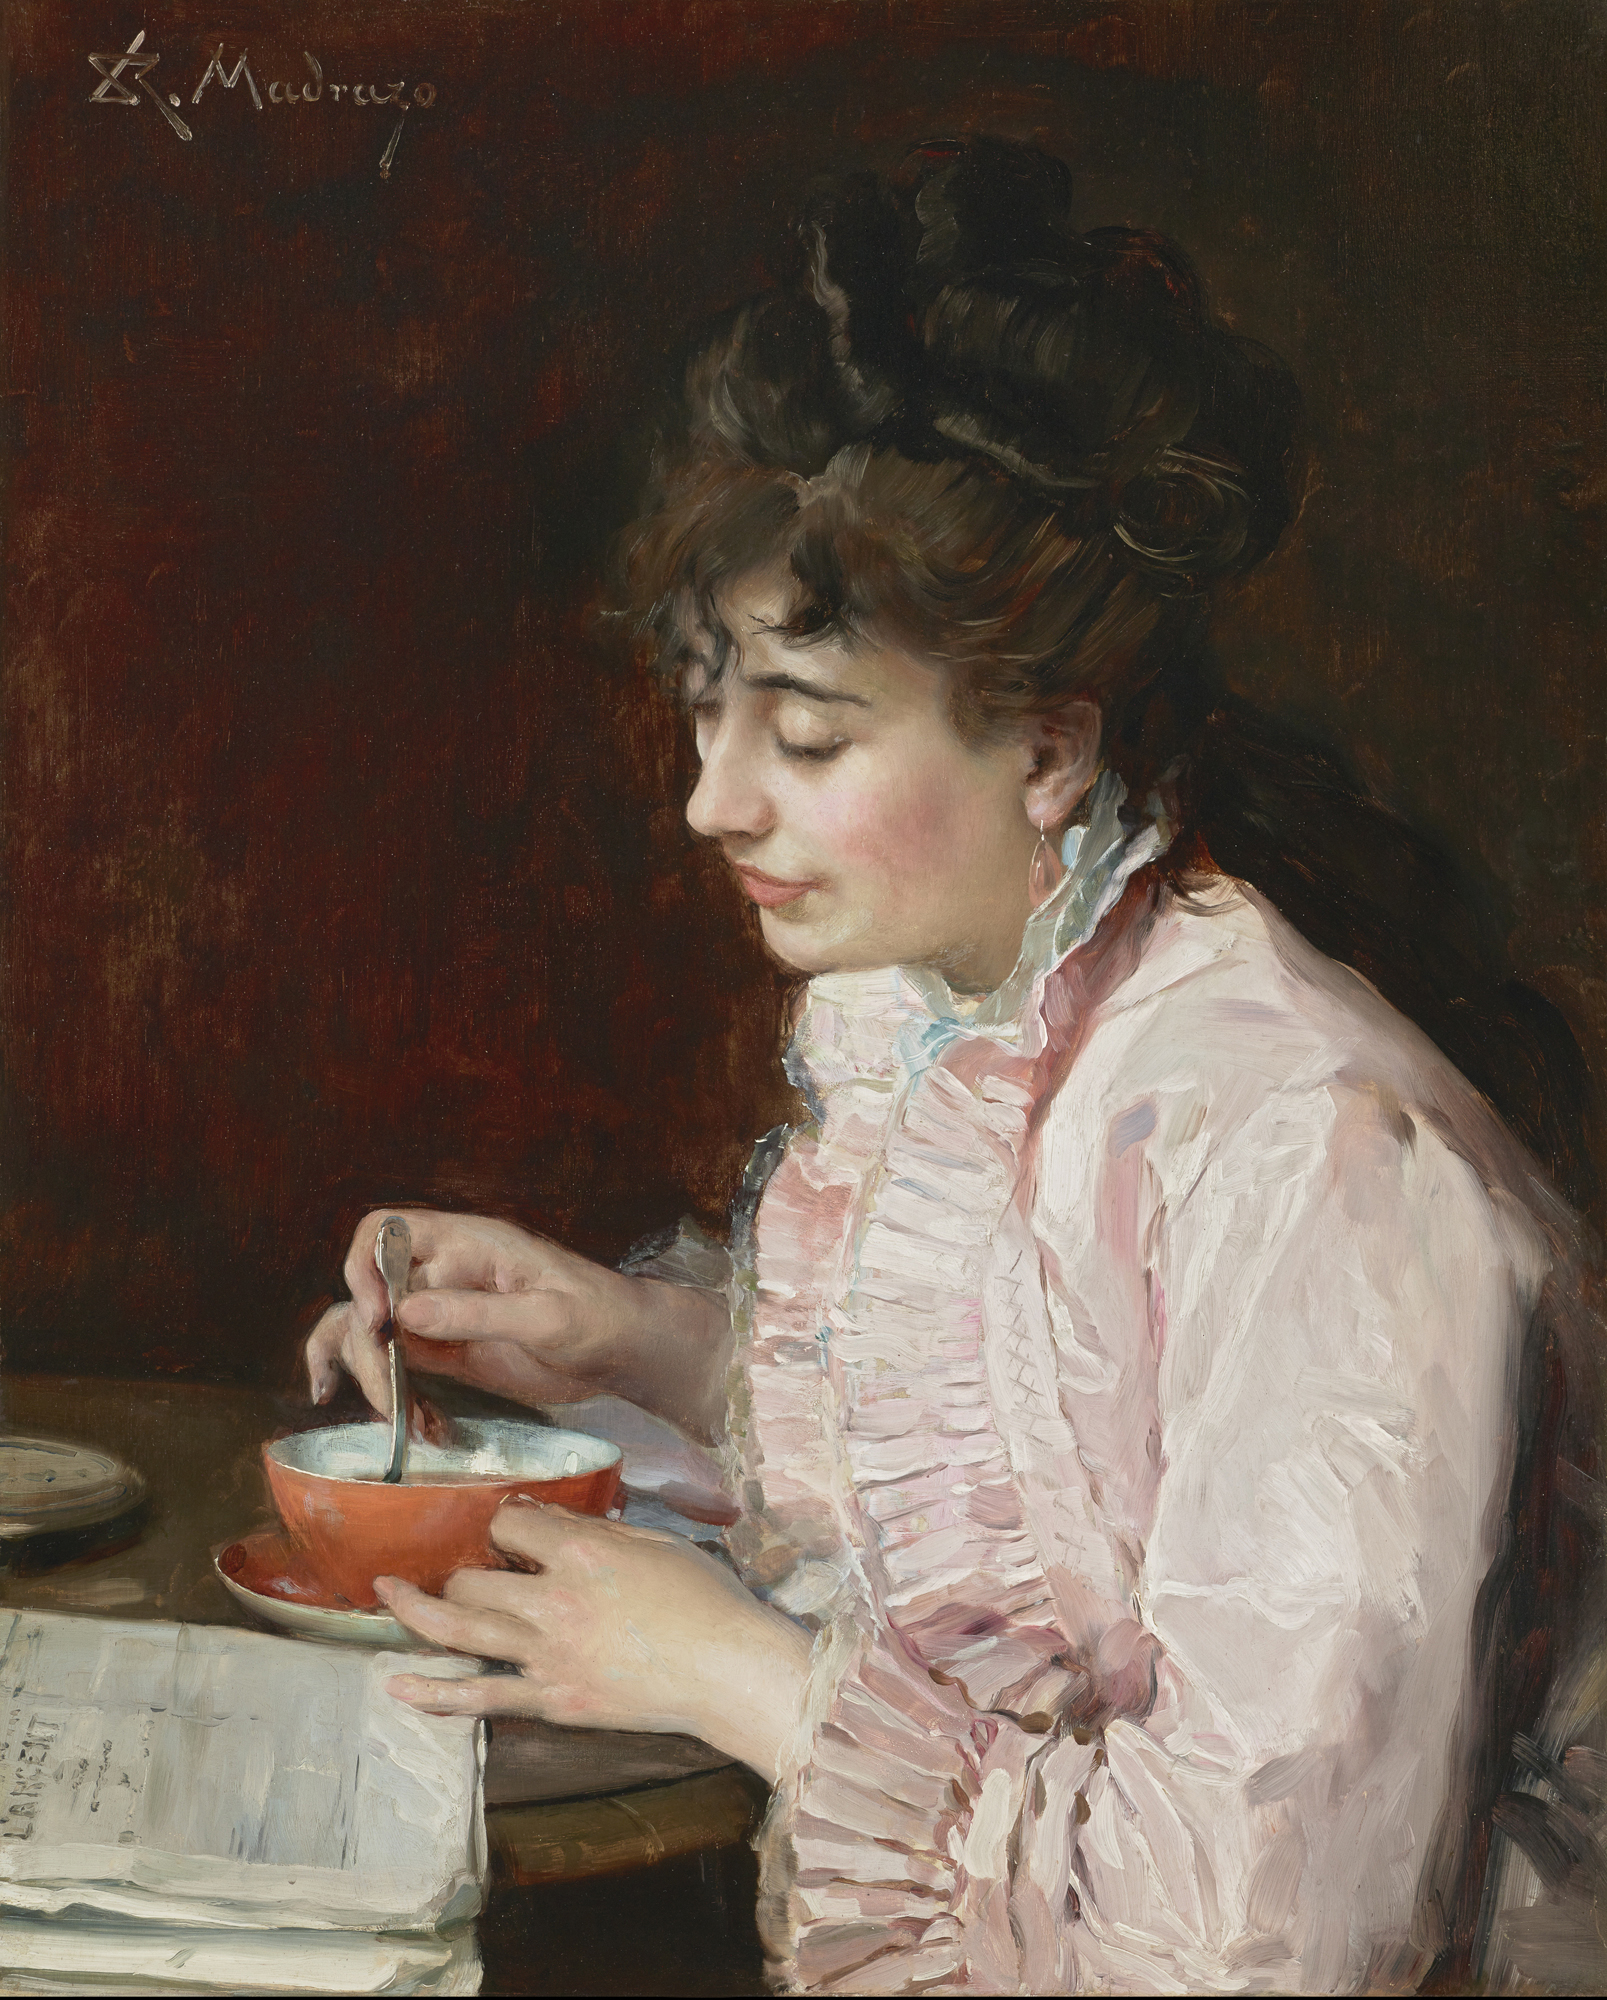 Raimundo de Madrazo y Garreta (Spanish, 1841-1920), Portrait of a Lady, 1890-91. Oil on cradled panel. Meadows Museum, SMU, Dallas. Museum Purchase thanks to a gift from Mrs. Mildred M. Oppenheimer in memory of Dean Carole Brandt, MM.2014.02. Photo by Michael Bodycomb